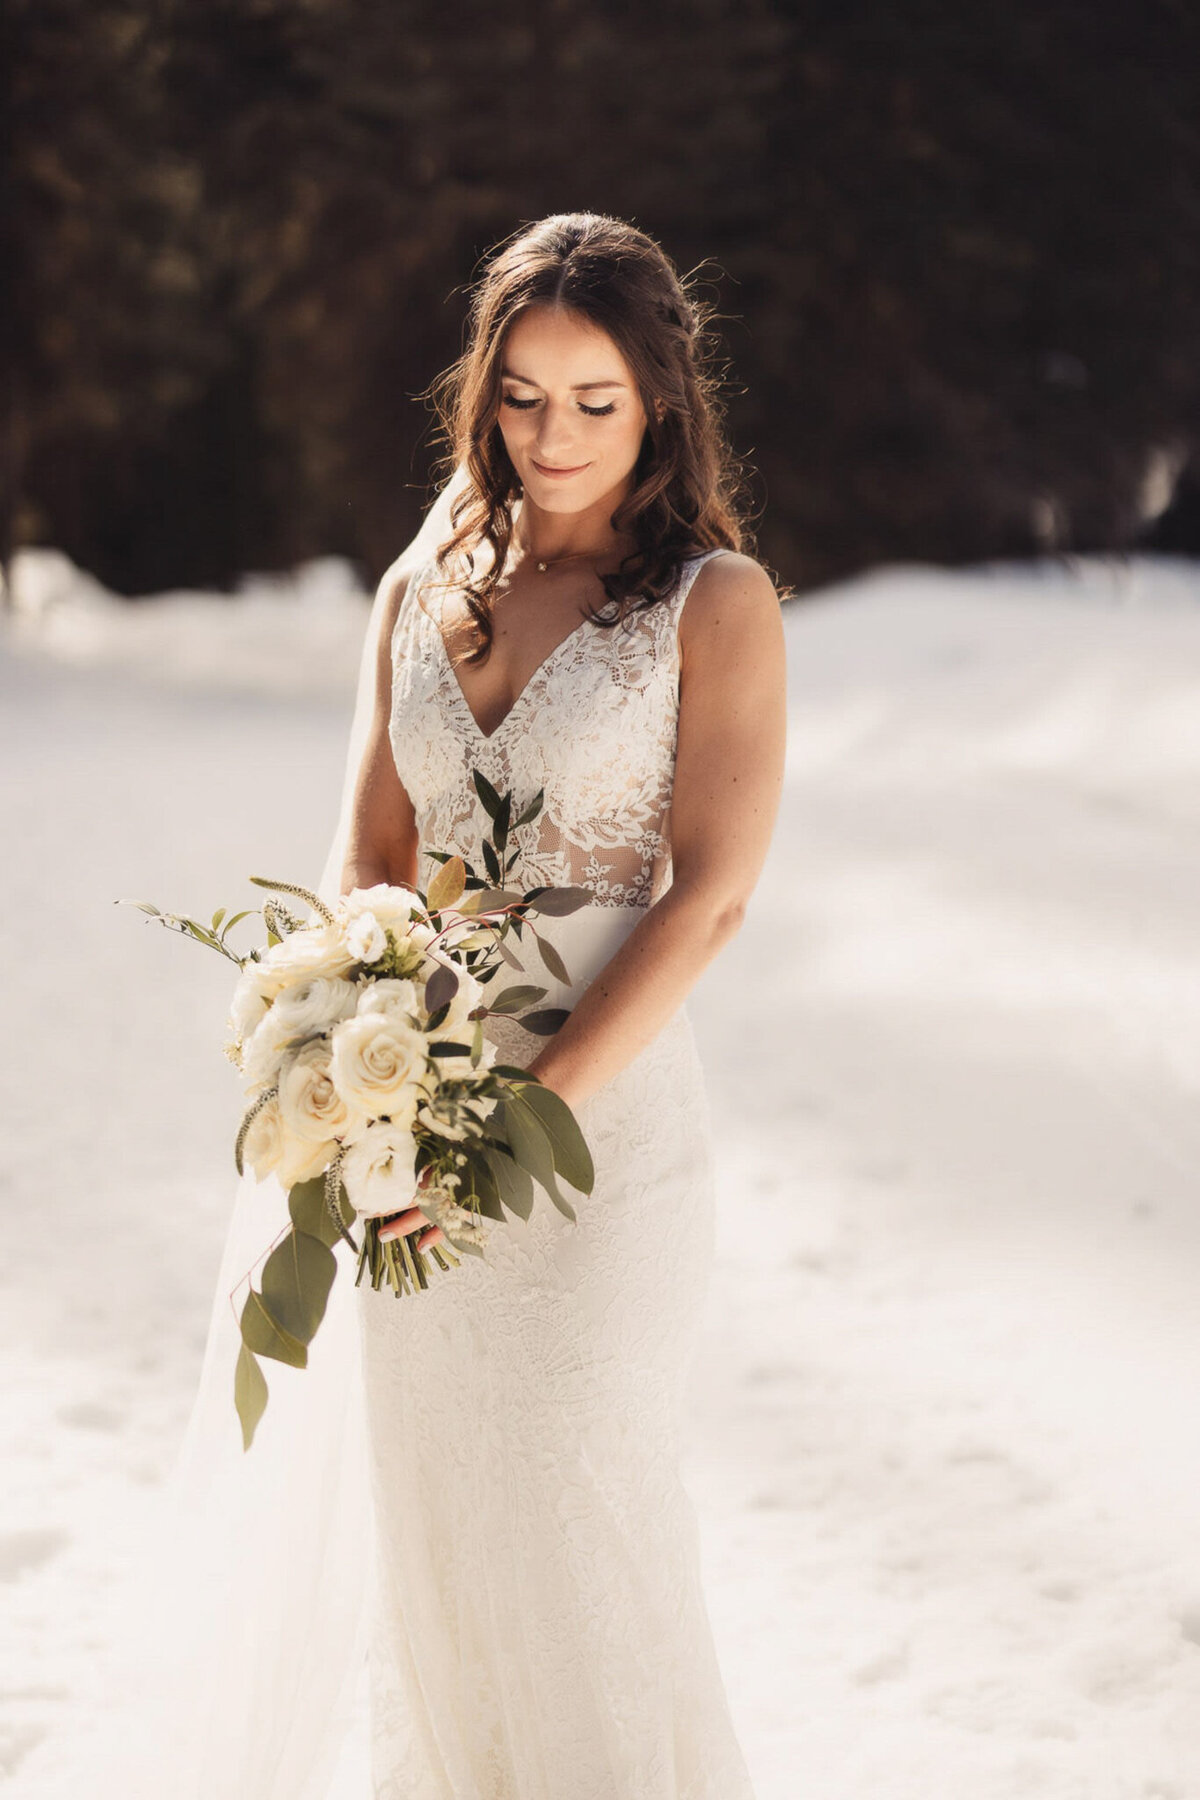 Moonlight Flowers, trendy and lush floral shop located in Sparwood, BC featured on the Brontë Bride Vendor Guide.